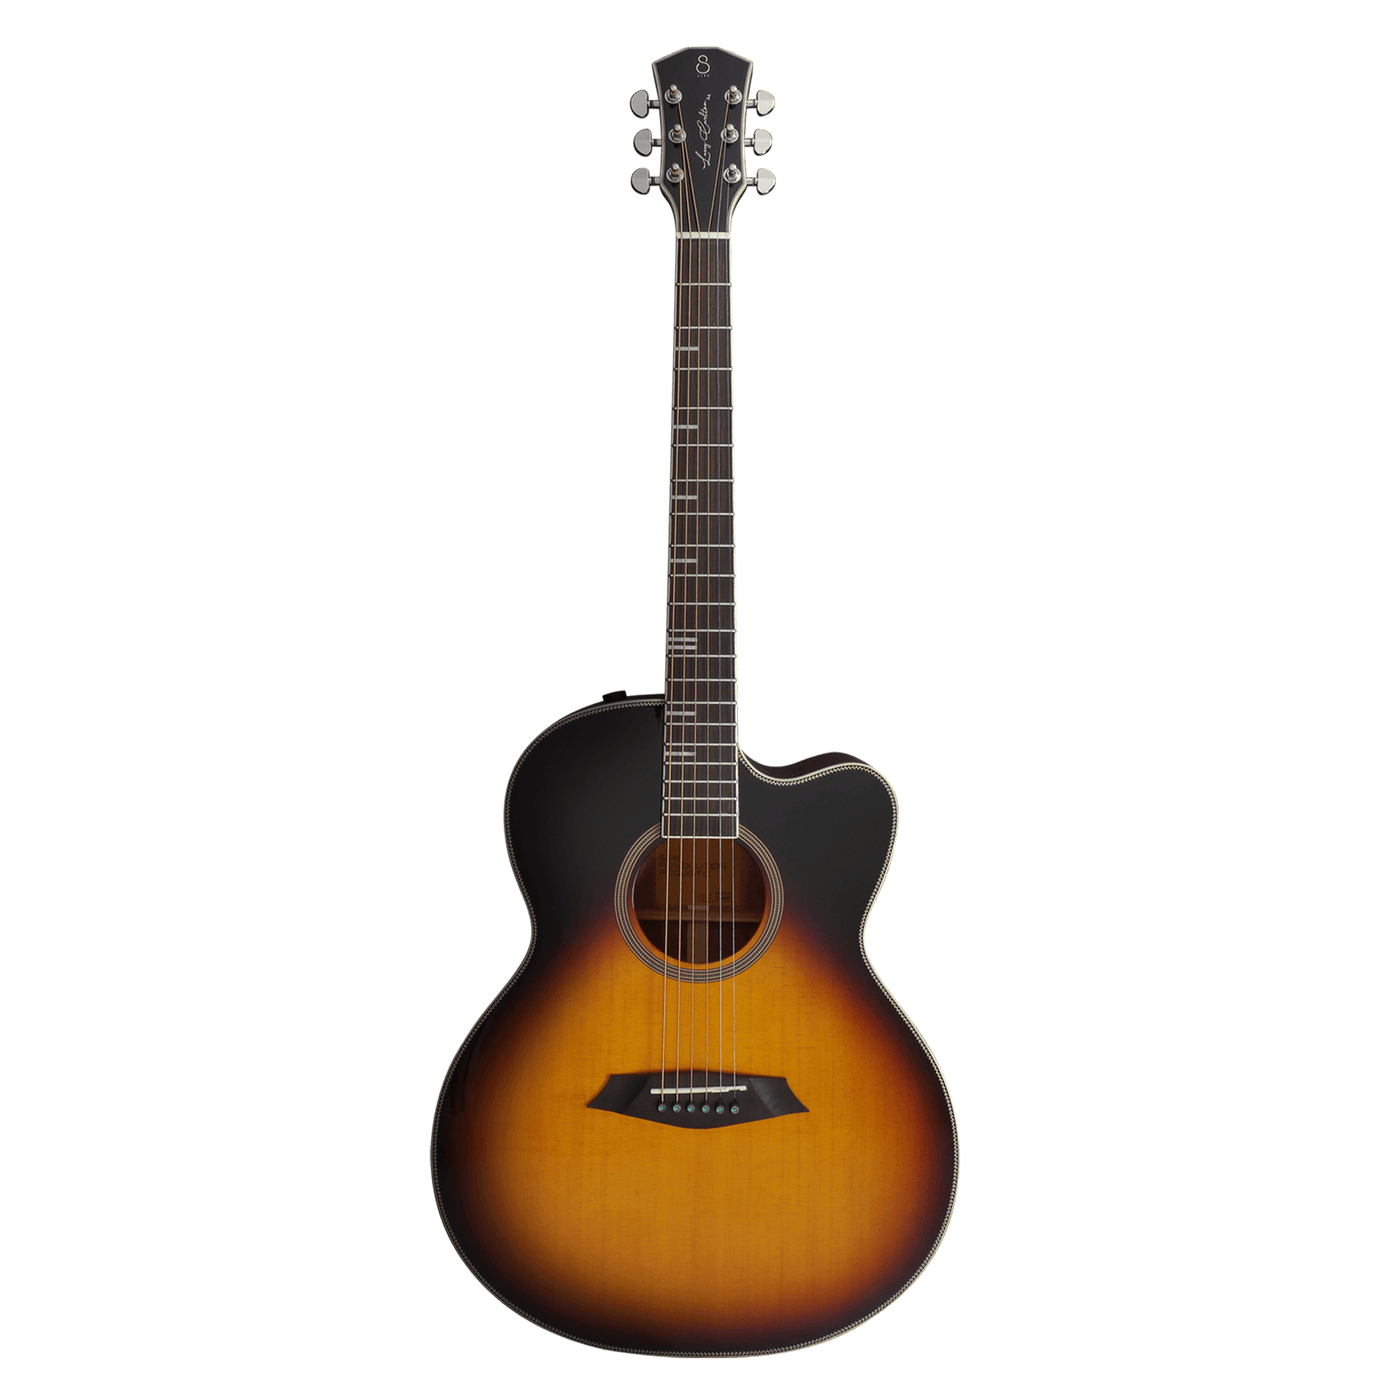 Sire A4-G Vintage Sunburst - $799990 - Gearhub - The upgraded Sire acoustic guitar is brimming with design and features meeting the quality standard of Larry Carlton. The A4 has two body shapes - Dreadnought and Grand Auditorium. More than the comfort from the rolled fretboard edges, the added solid Mahogany back plate makes the acoustic guitar more worth than its value. Cuerpo • Modelo: Larry Carlton A4-G (Grand Auditorium)• Top: Roasted Solid Spruce• Sides: Mahogany• Top: Solid Mahogany • Terminación: Pol